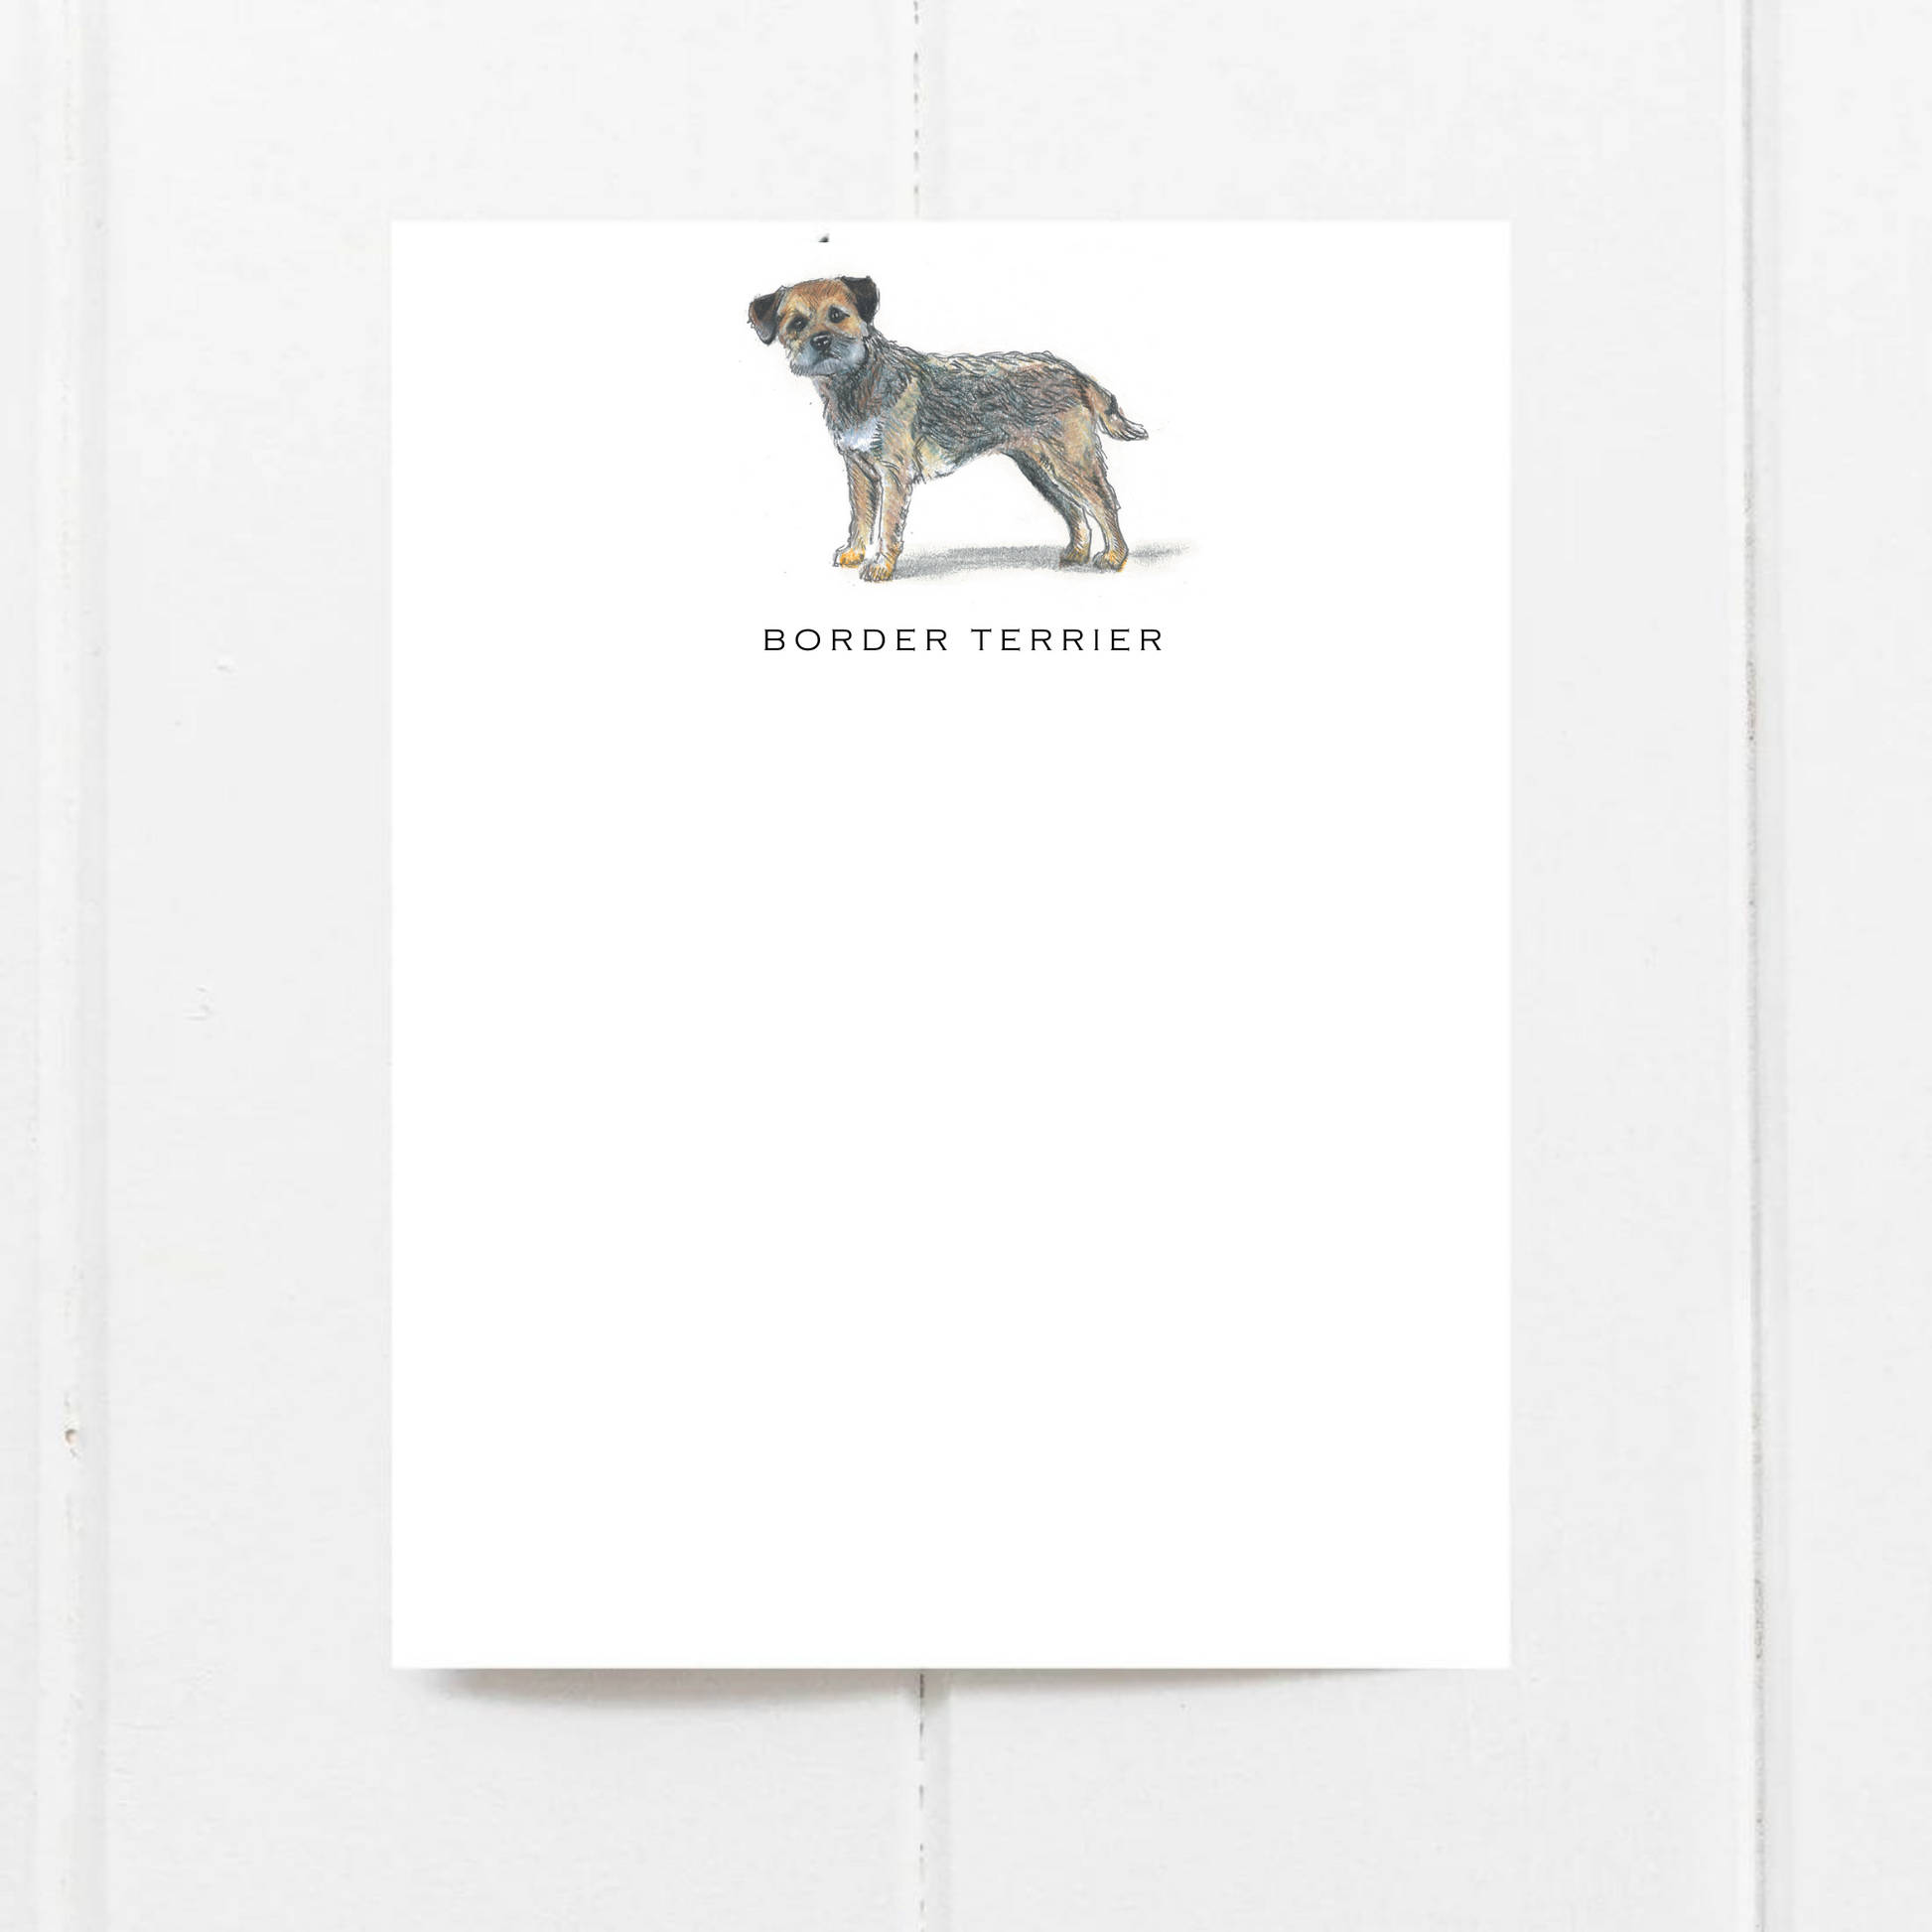 Border Terrier note cards from Fable & Sage